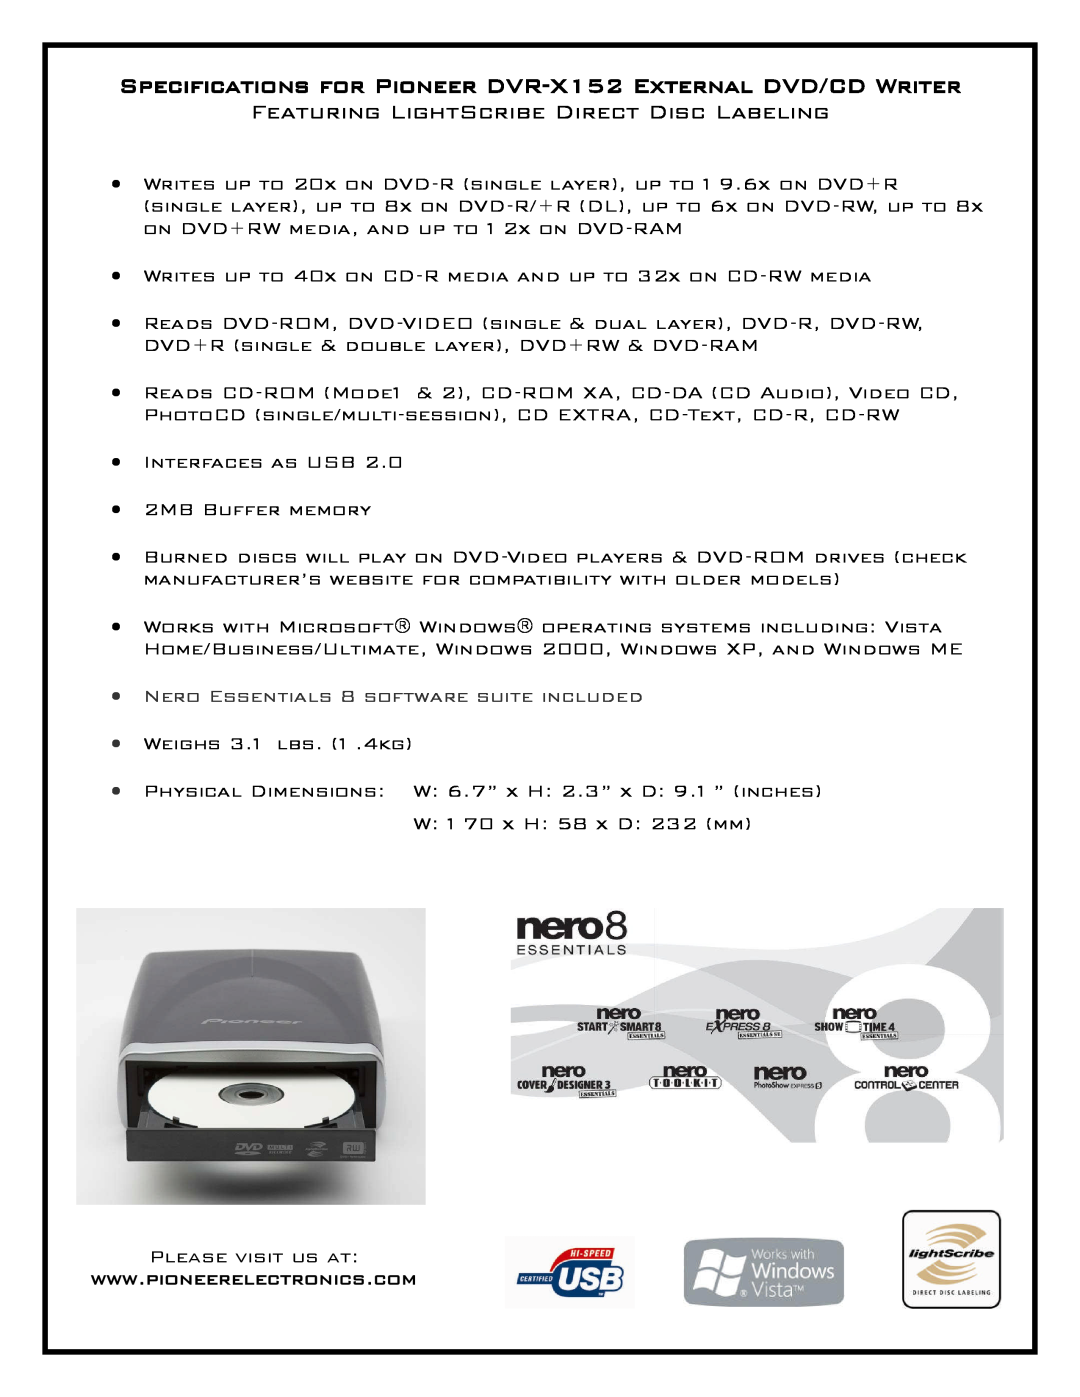 Pioneer manual Specifications for Pioneer DVR-X152 External DVD/CD Writer, Featuring LightScribe Direct Disc Labeling 